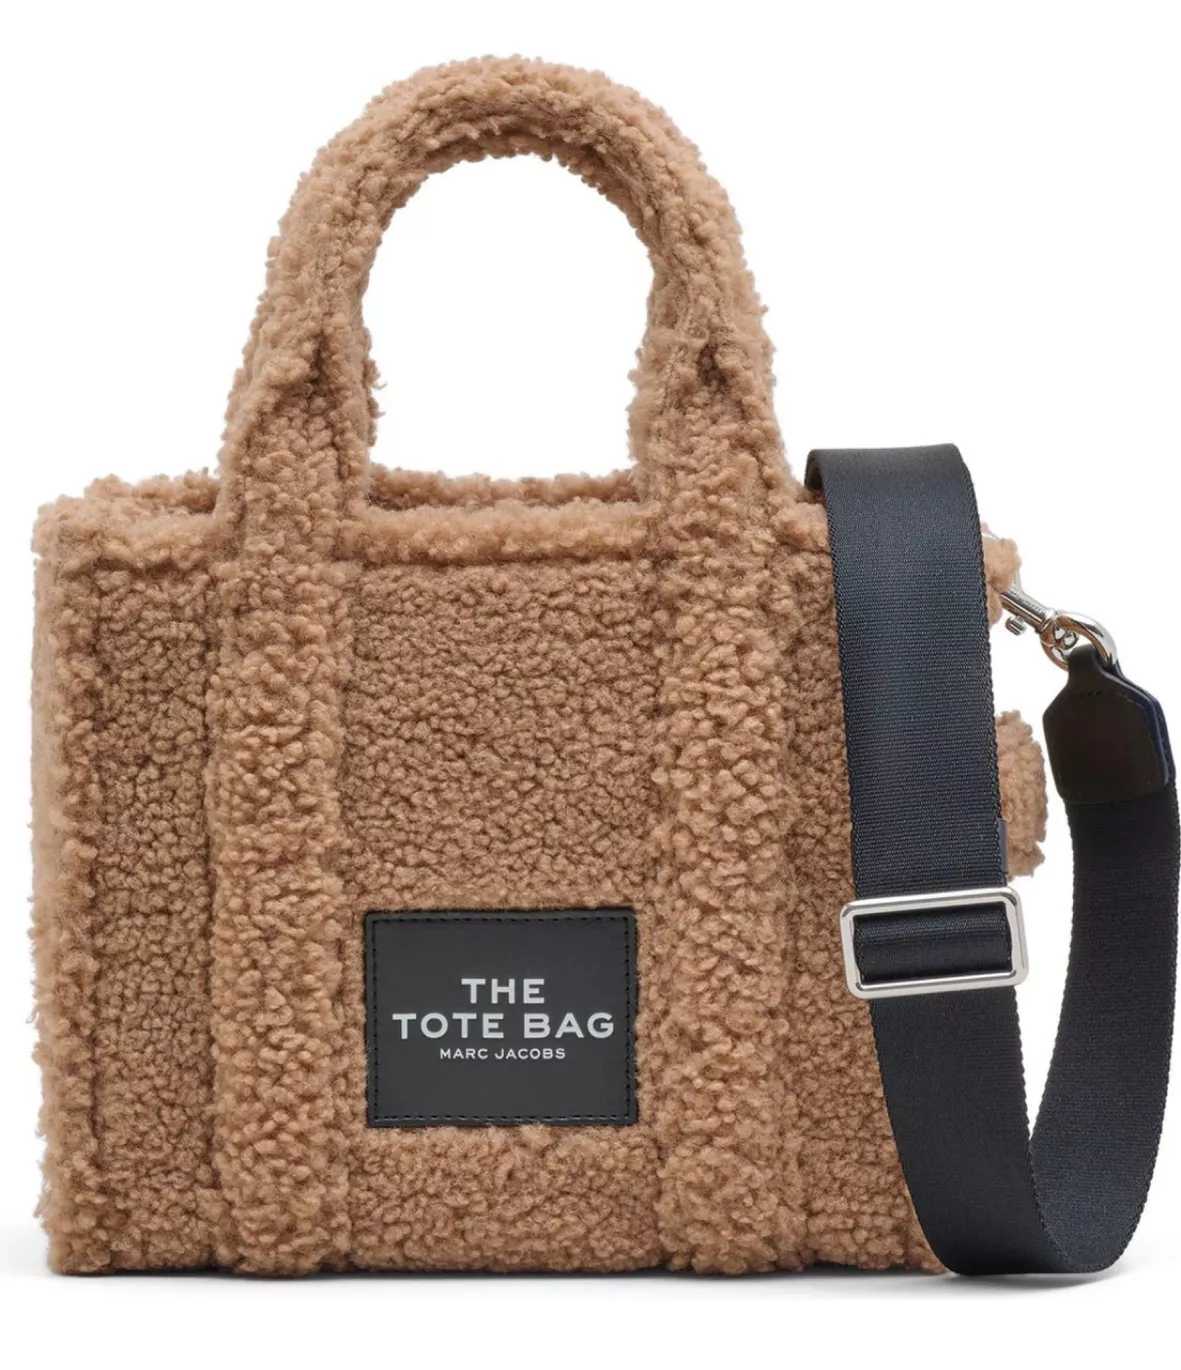 Stoney Clover Lane x Bloomingdale's Brown Bag Collection - 150th  Anniversary Exclusive